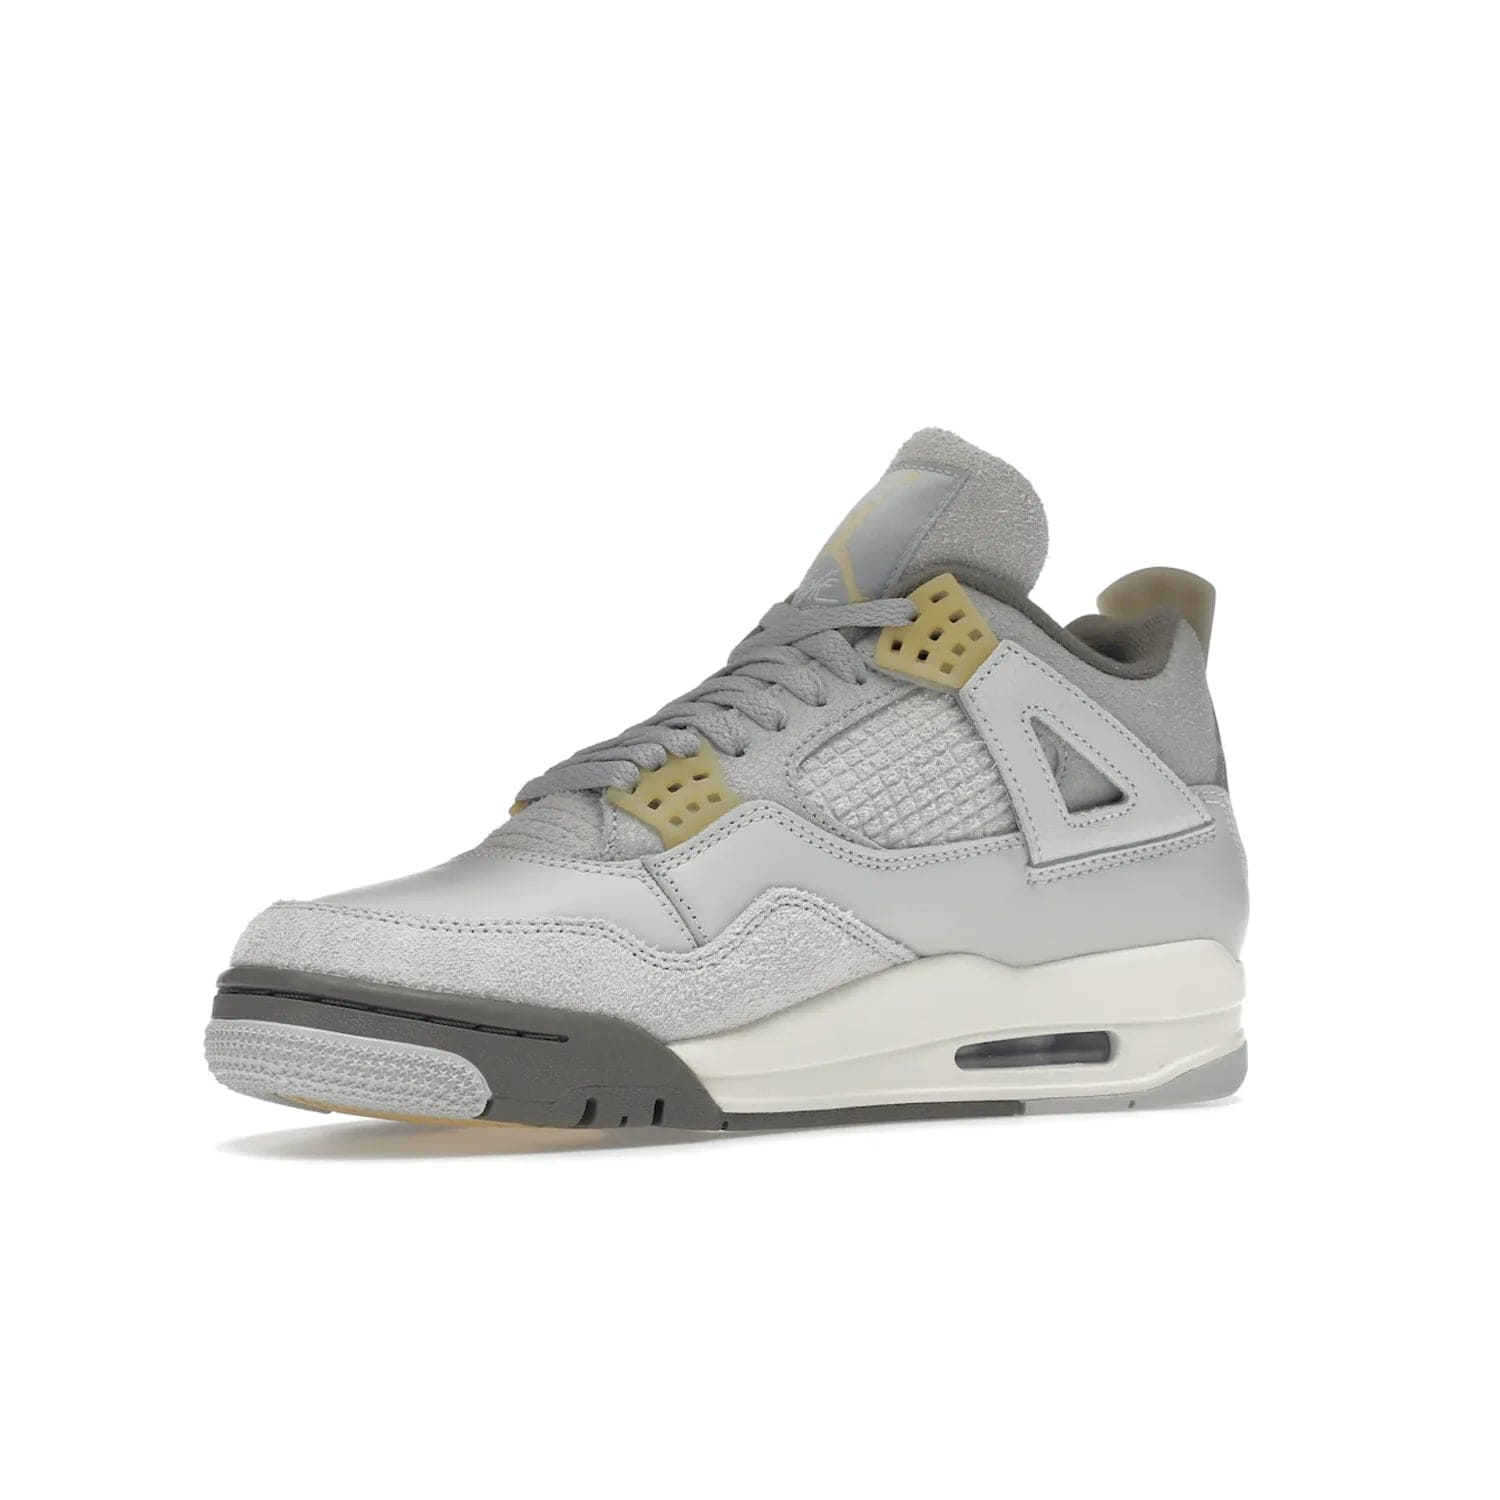 Jordan 4 Retro SE Craft Photon Dust - Image 16 - Only at www.BallersClubKickz.com - Upgrade your shoe collection with the Air Jordan 4 Retro SE Craft Photon Dust. This luxurious sneaker features a combination of suede and leather with unique grey tones like Photon Dust, Pale Vanilla, Off White, Grey Fog, Flat Pewter, and Sail. Available February 11, 2023.